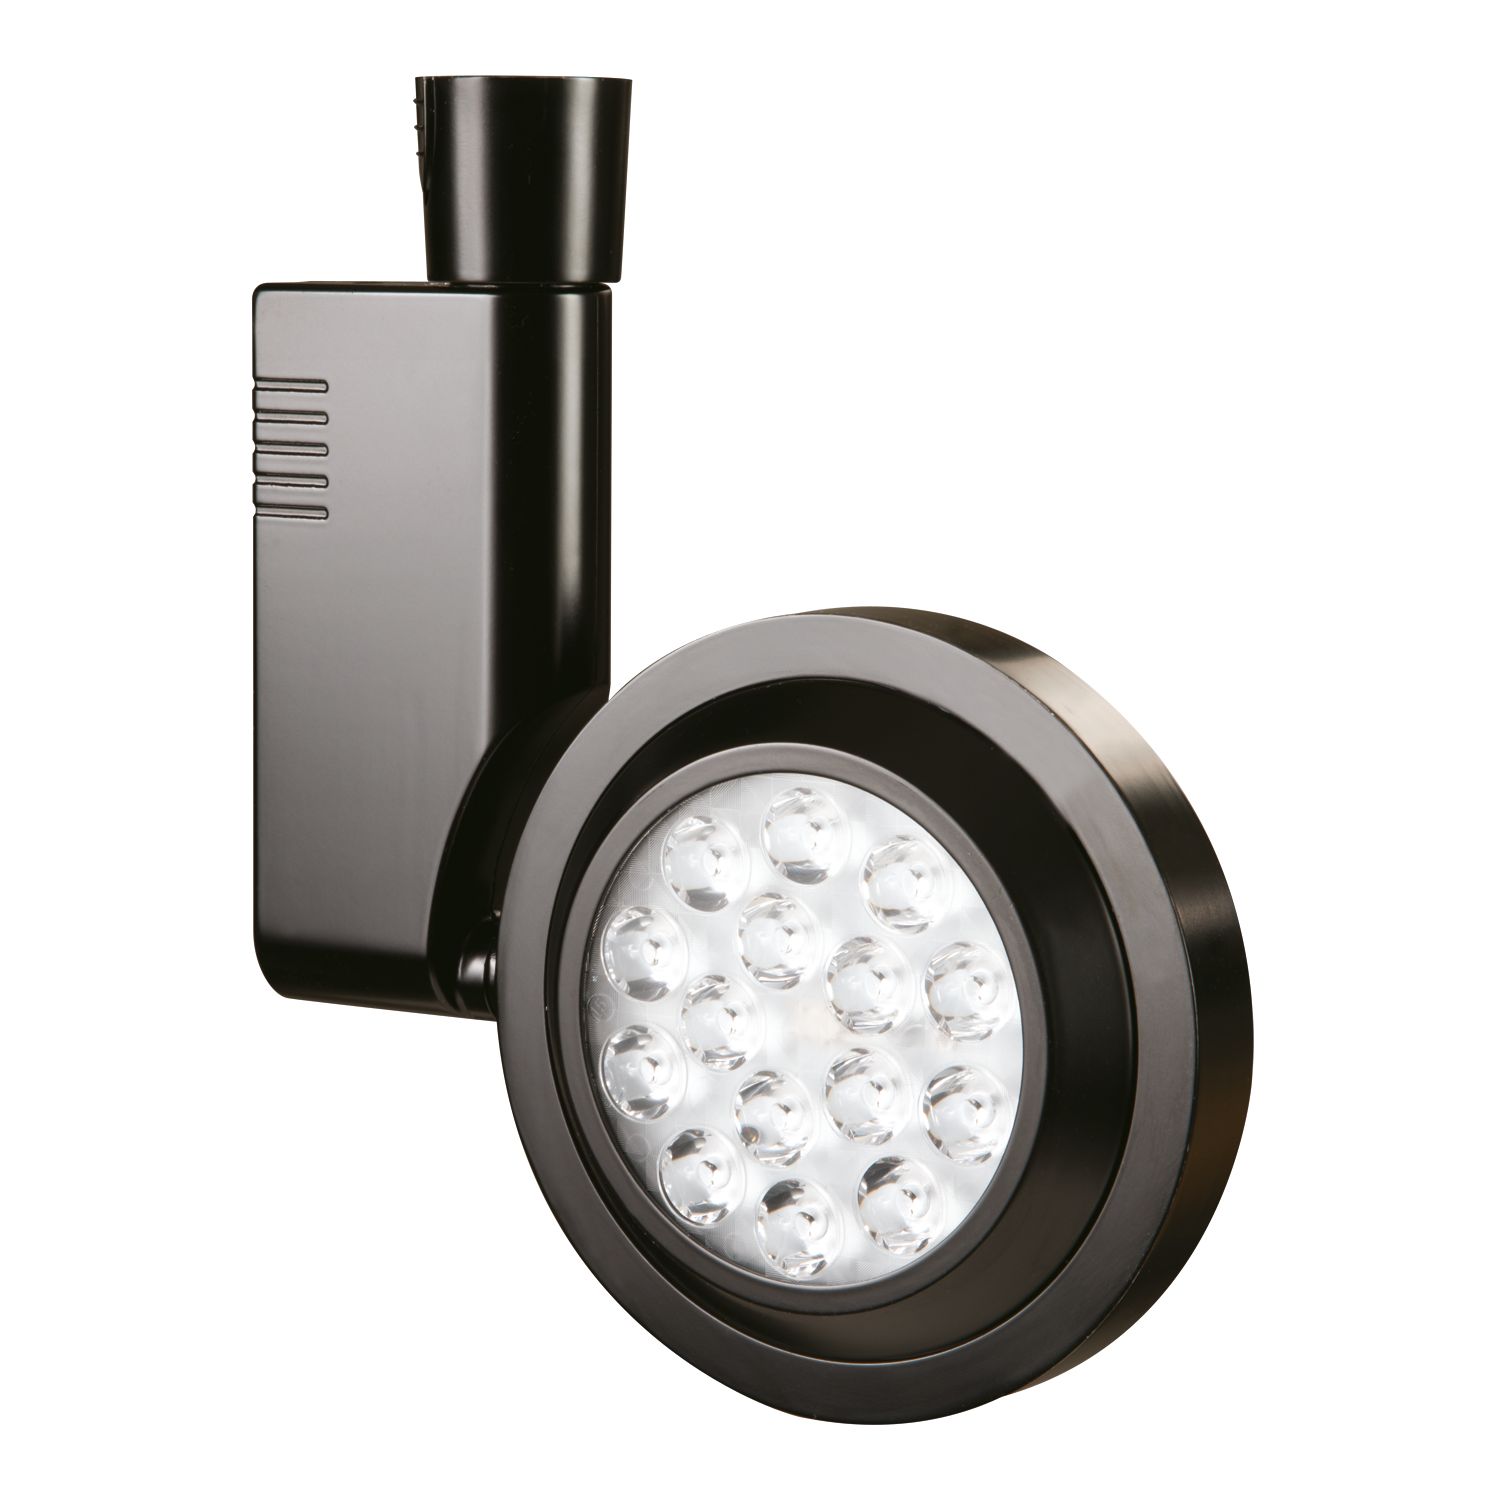 HALO 806 / 807 High Output LED Track Fixture | Cooper Lighting 